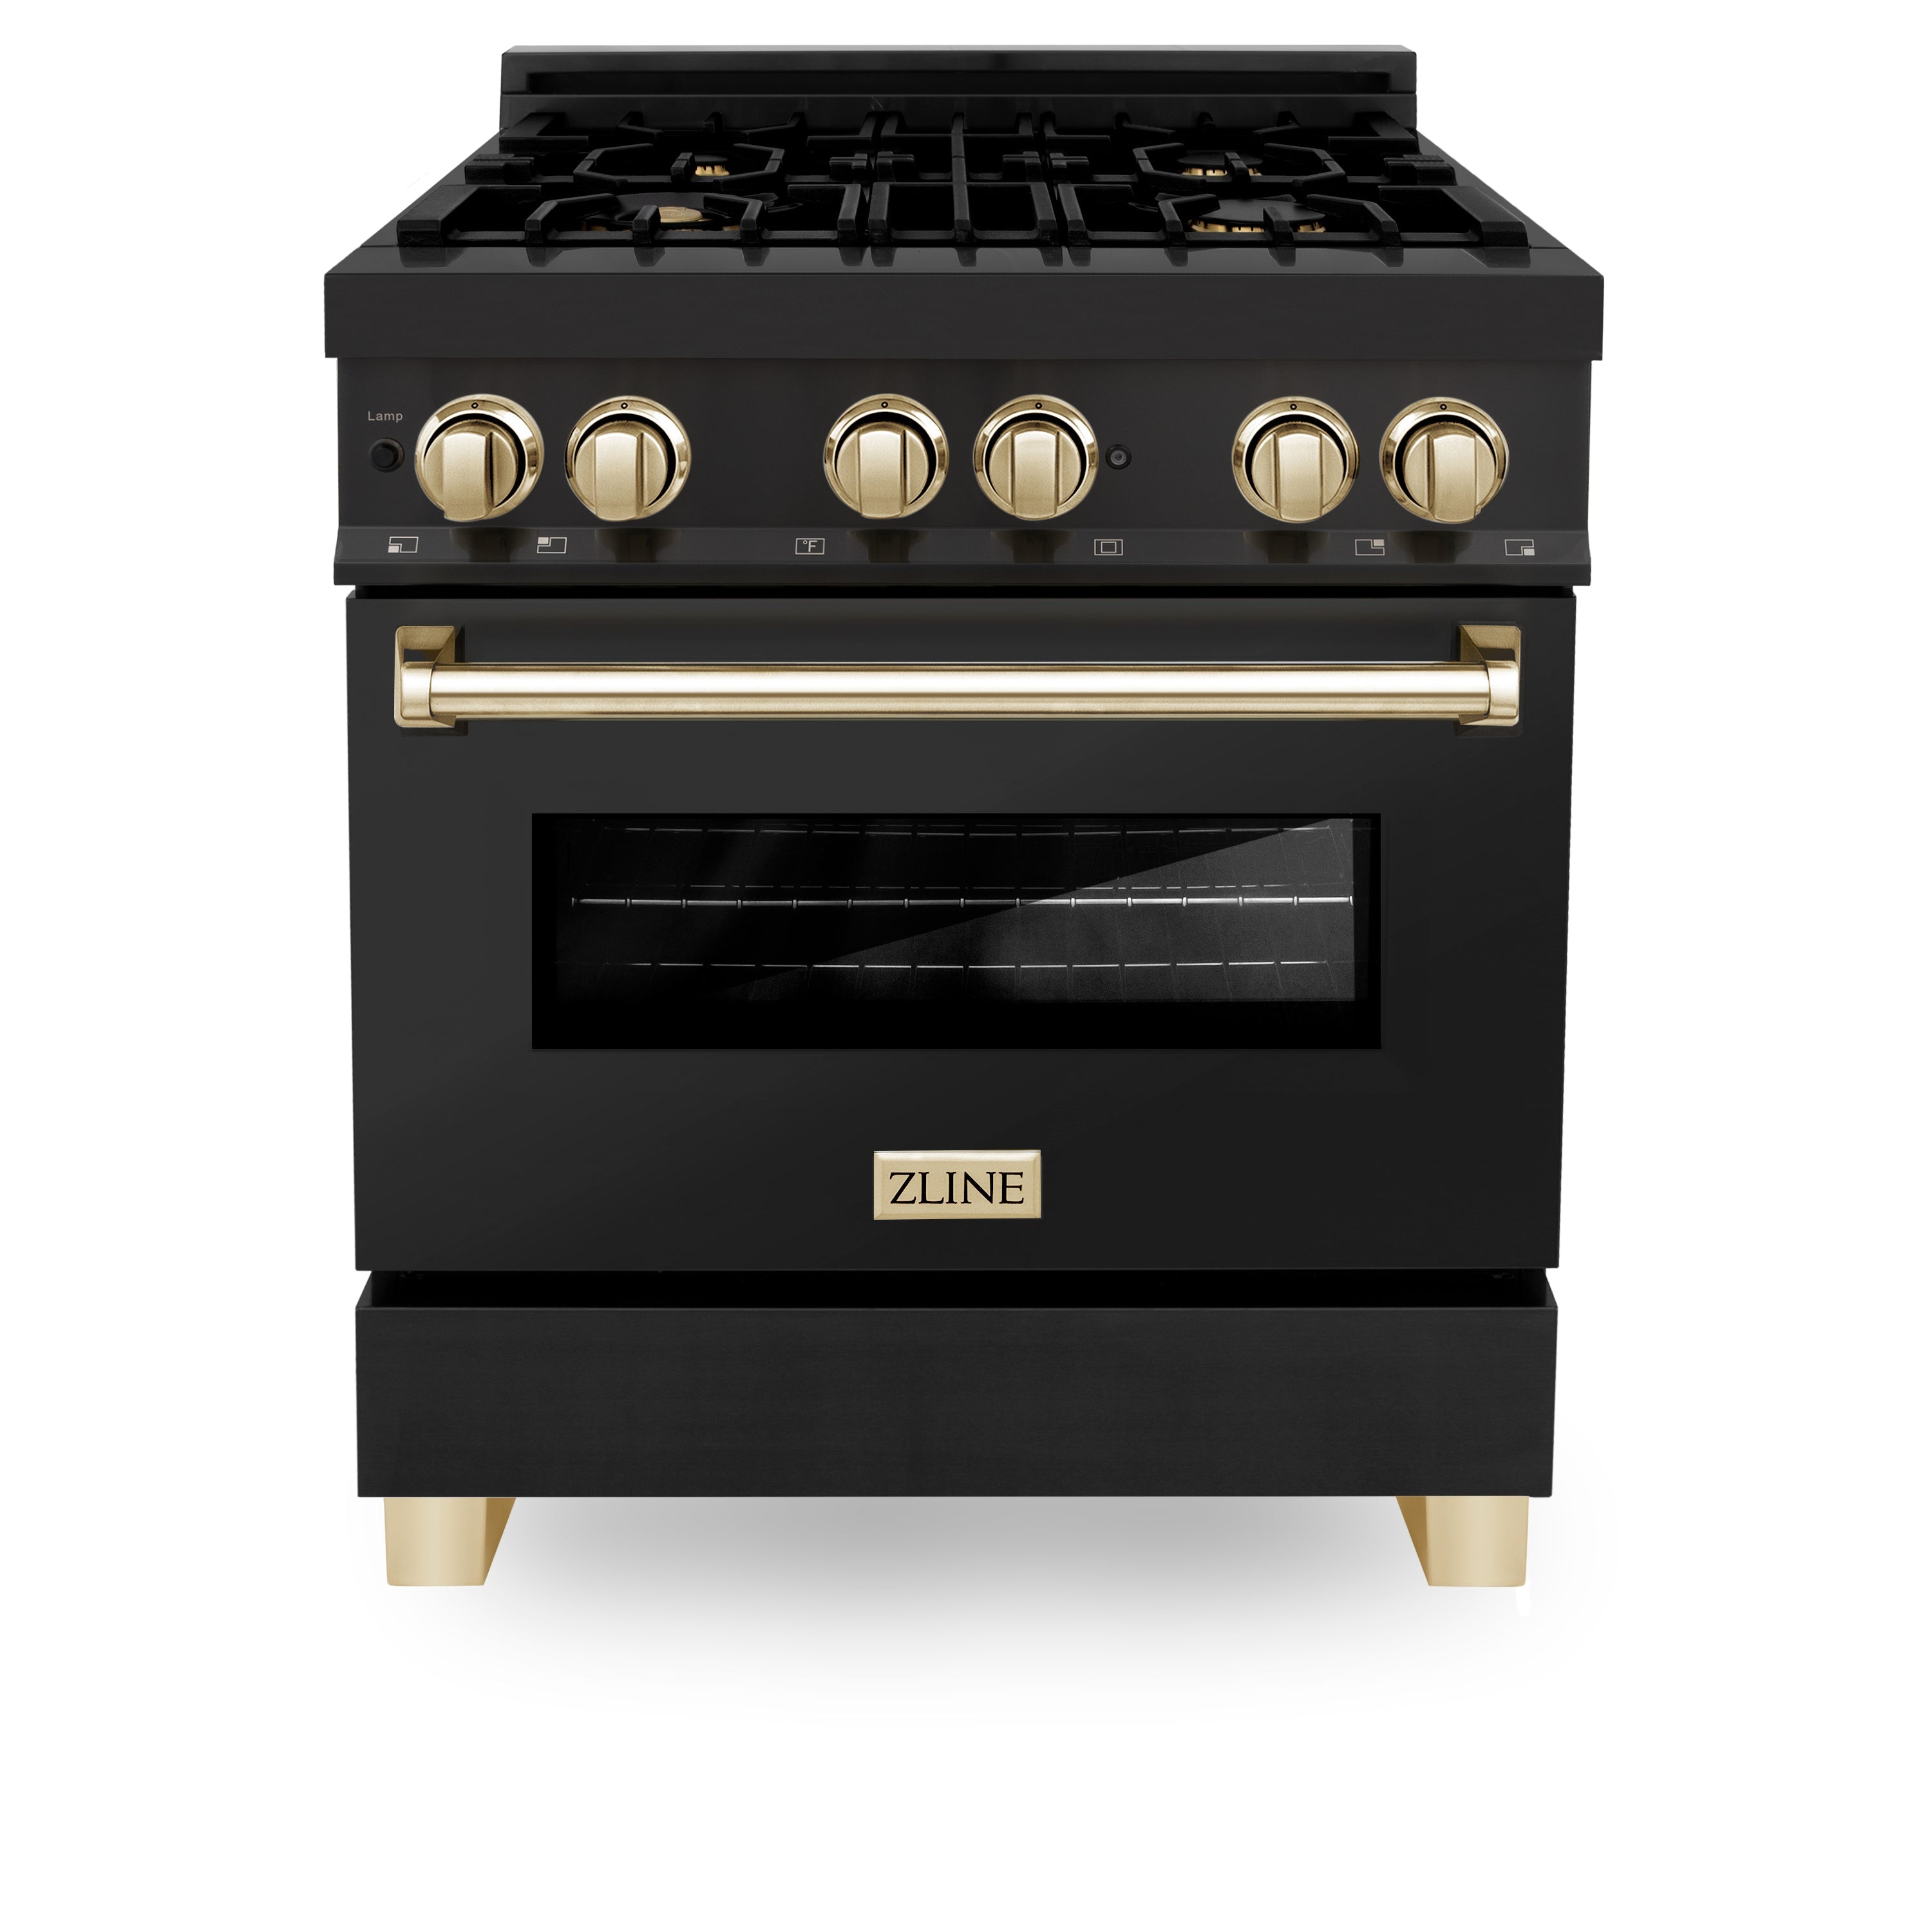 ZLINE Autograph Edition 30" 4.0 cu. ft. Dual Fuel Range with Gas Stove and Electric Oven in Black Stainless Steel with Accents - RABZ-30